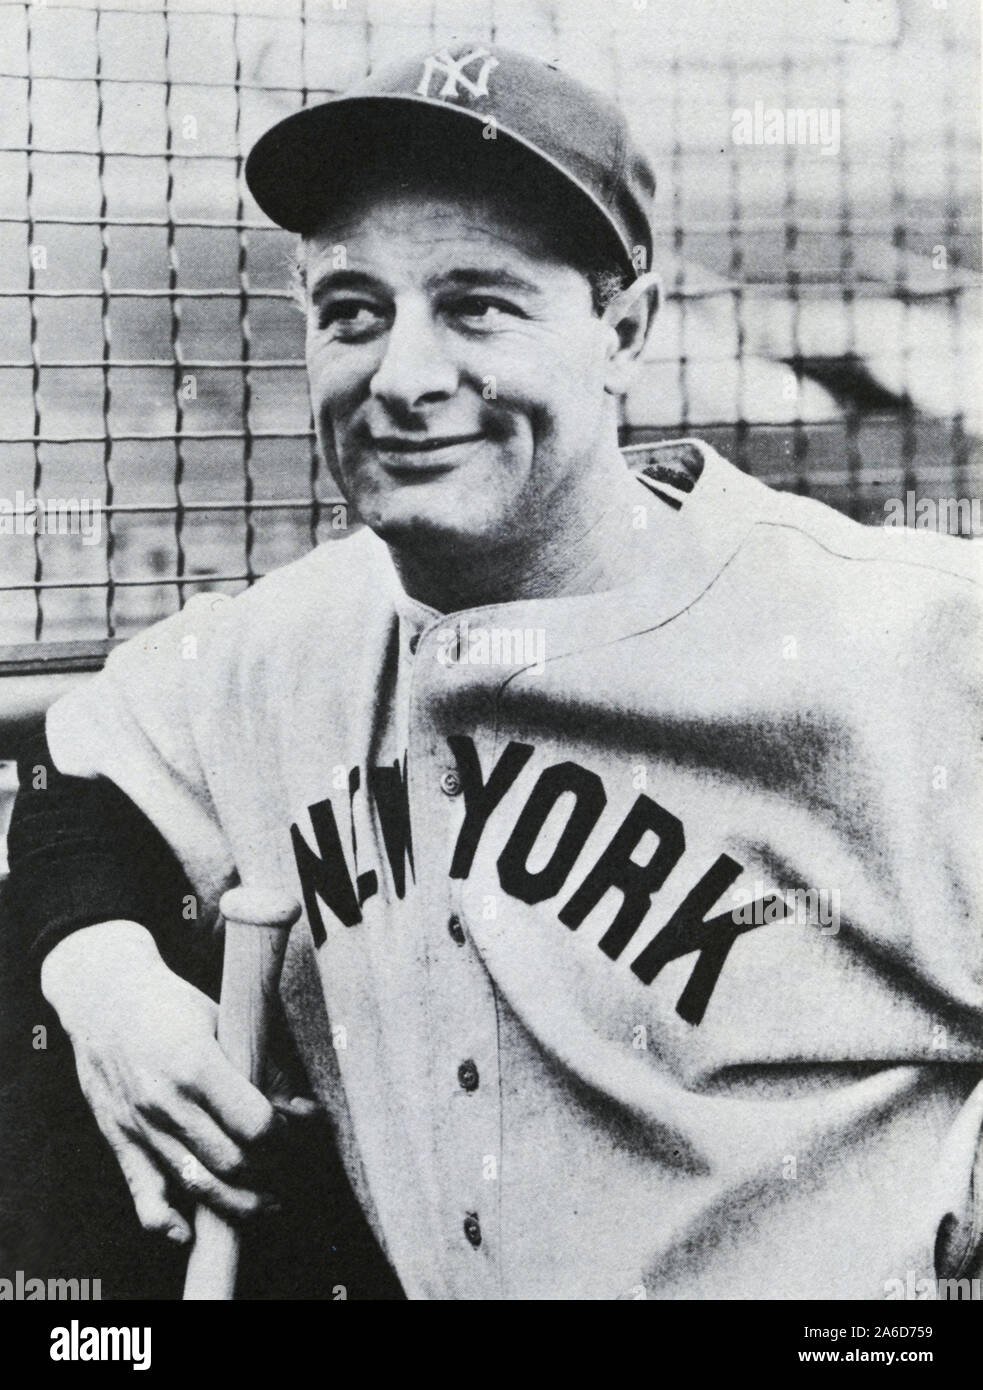 Lou gehrig hi-res stock photography and images - Alamy